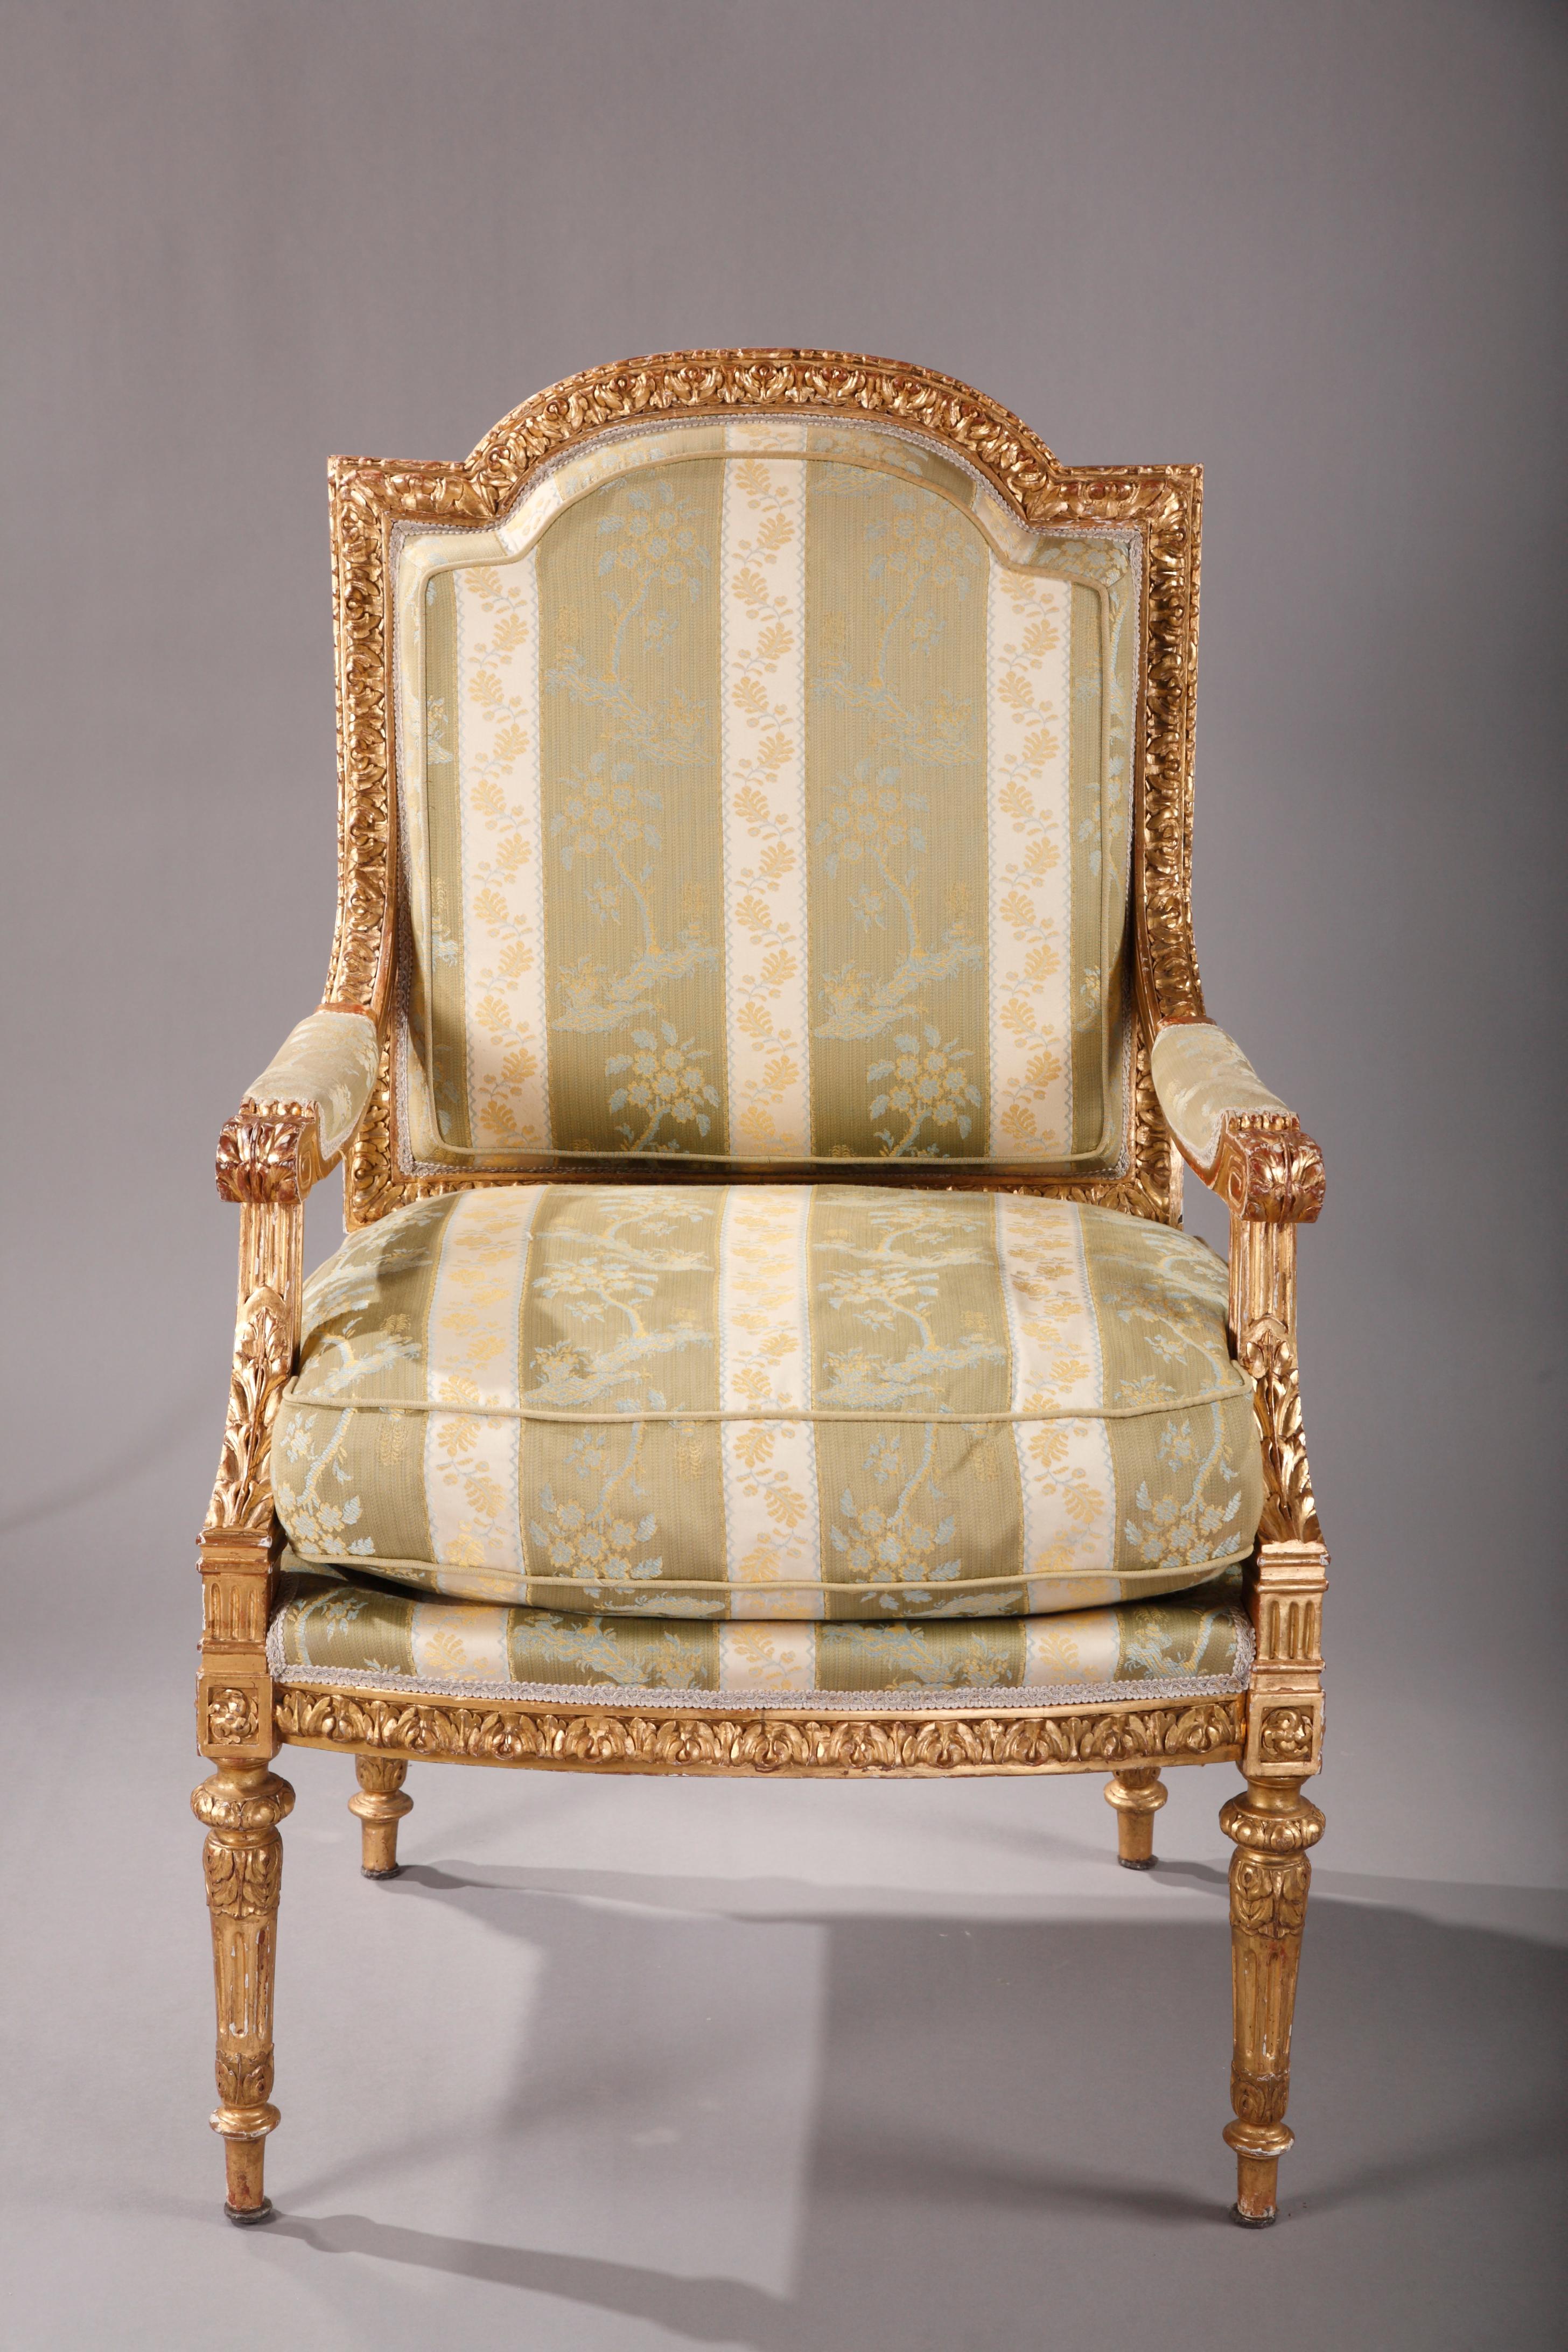 A very fine pair of Louis XVI style carved and gilded wood armchairs, with the back in the form of an inverted gendarme's hat ; the seatback and the seat belt are delicately carved with water leaves, acanthuses and rosettes. Reposing on tapered and